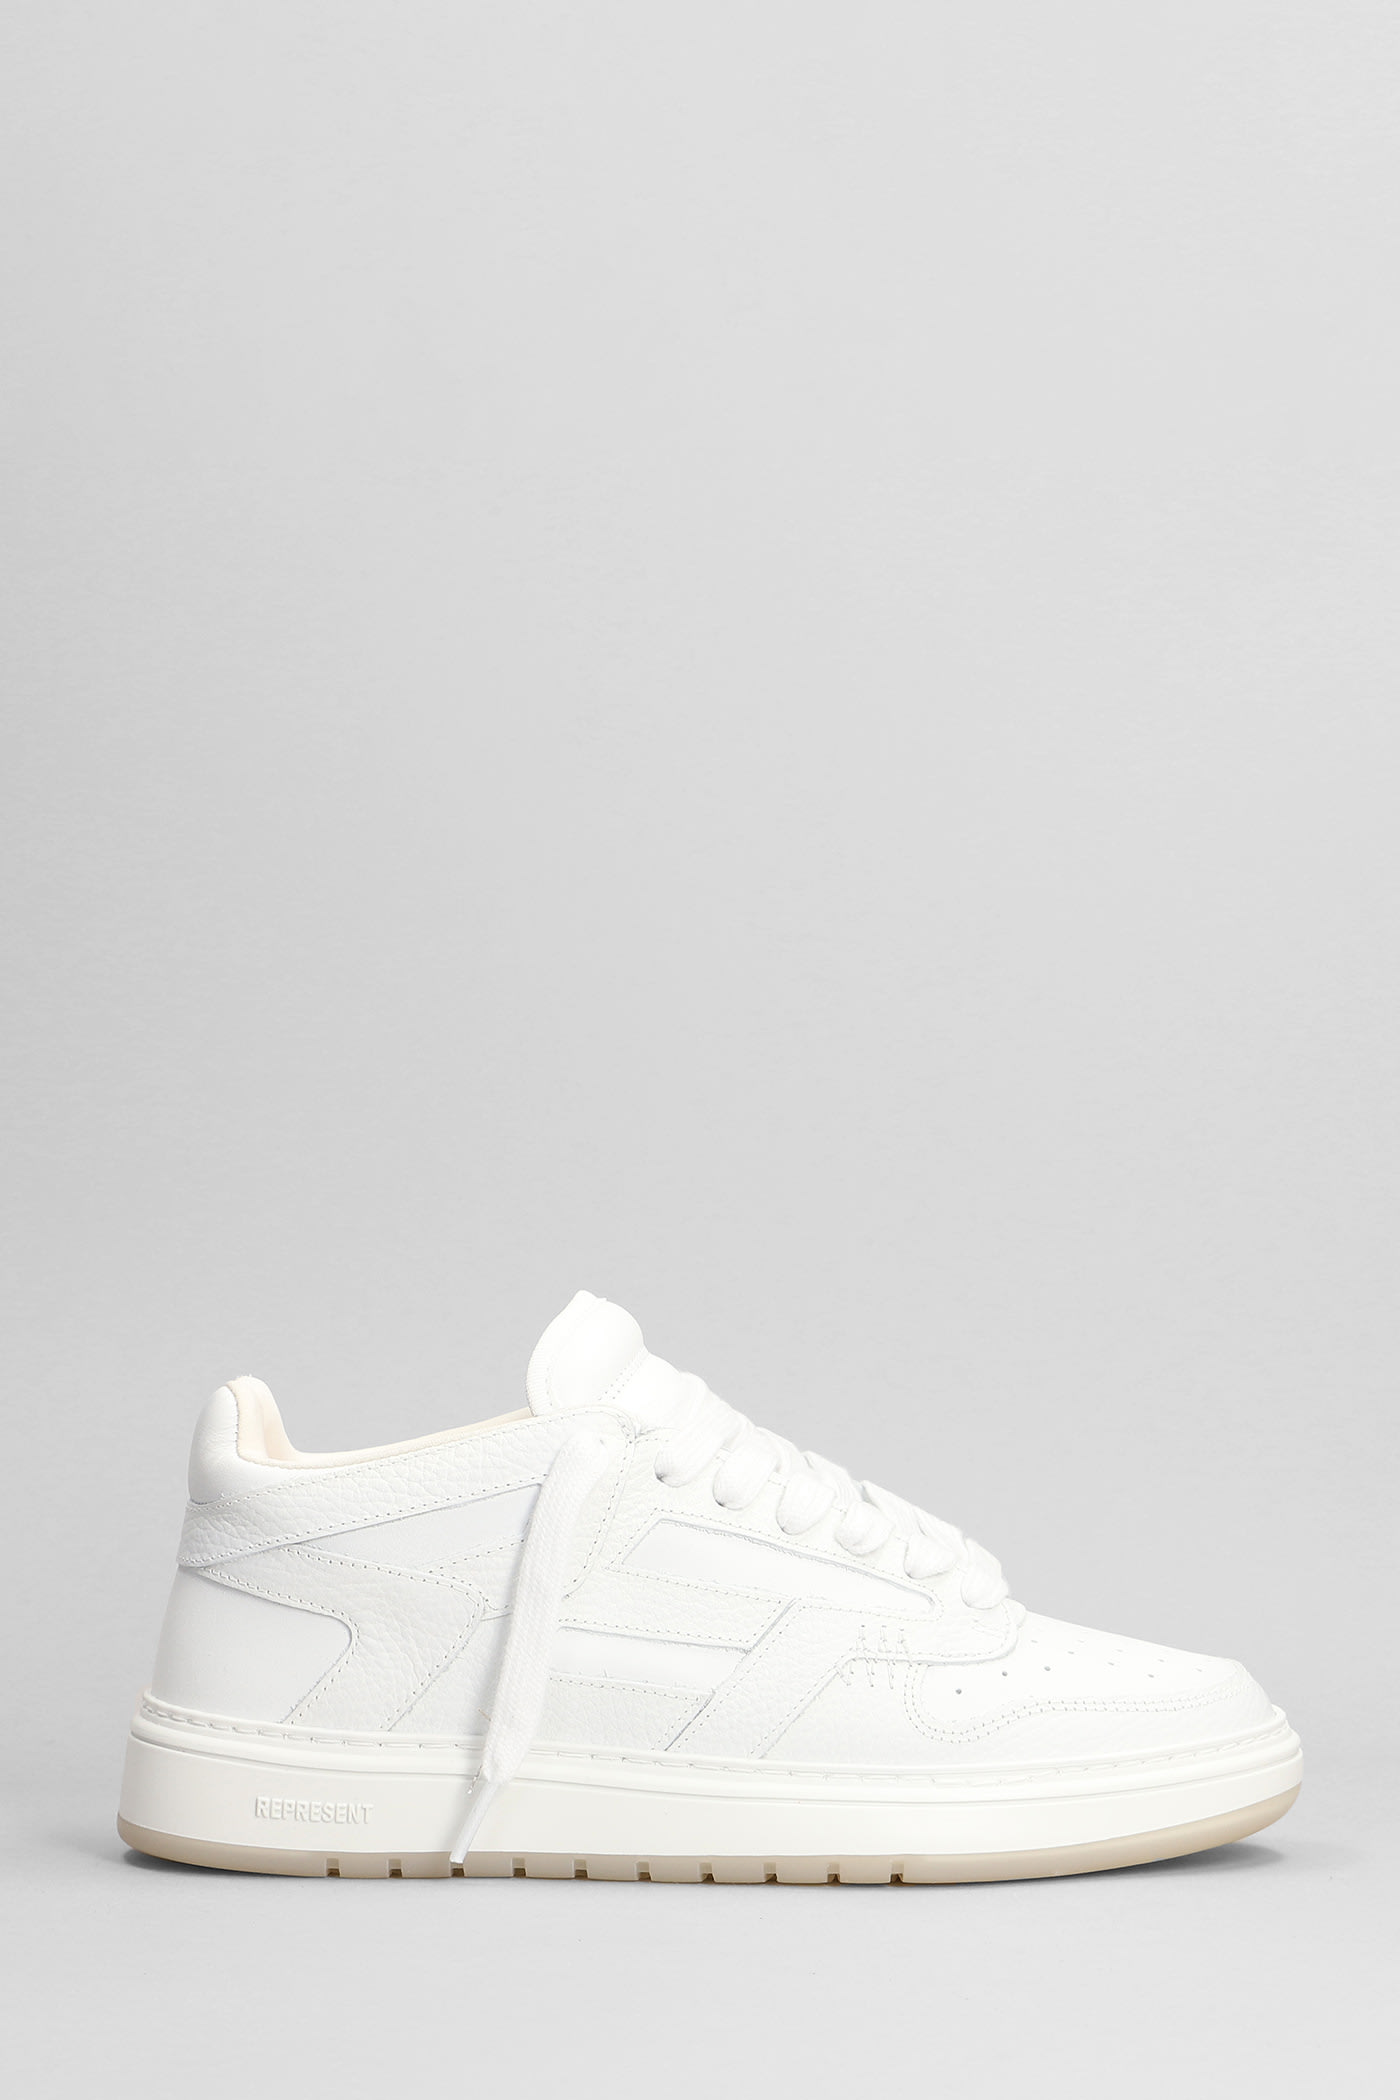 REPRESENT REPTOR LOW SNEAKERS IN WHITE LEATHER